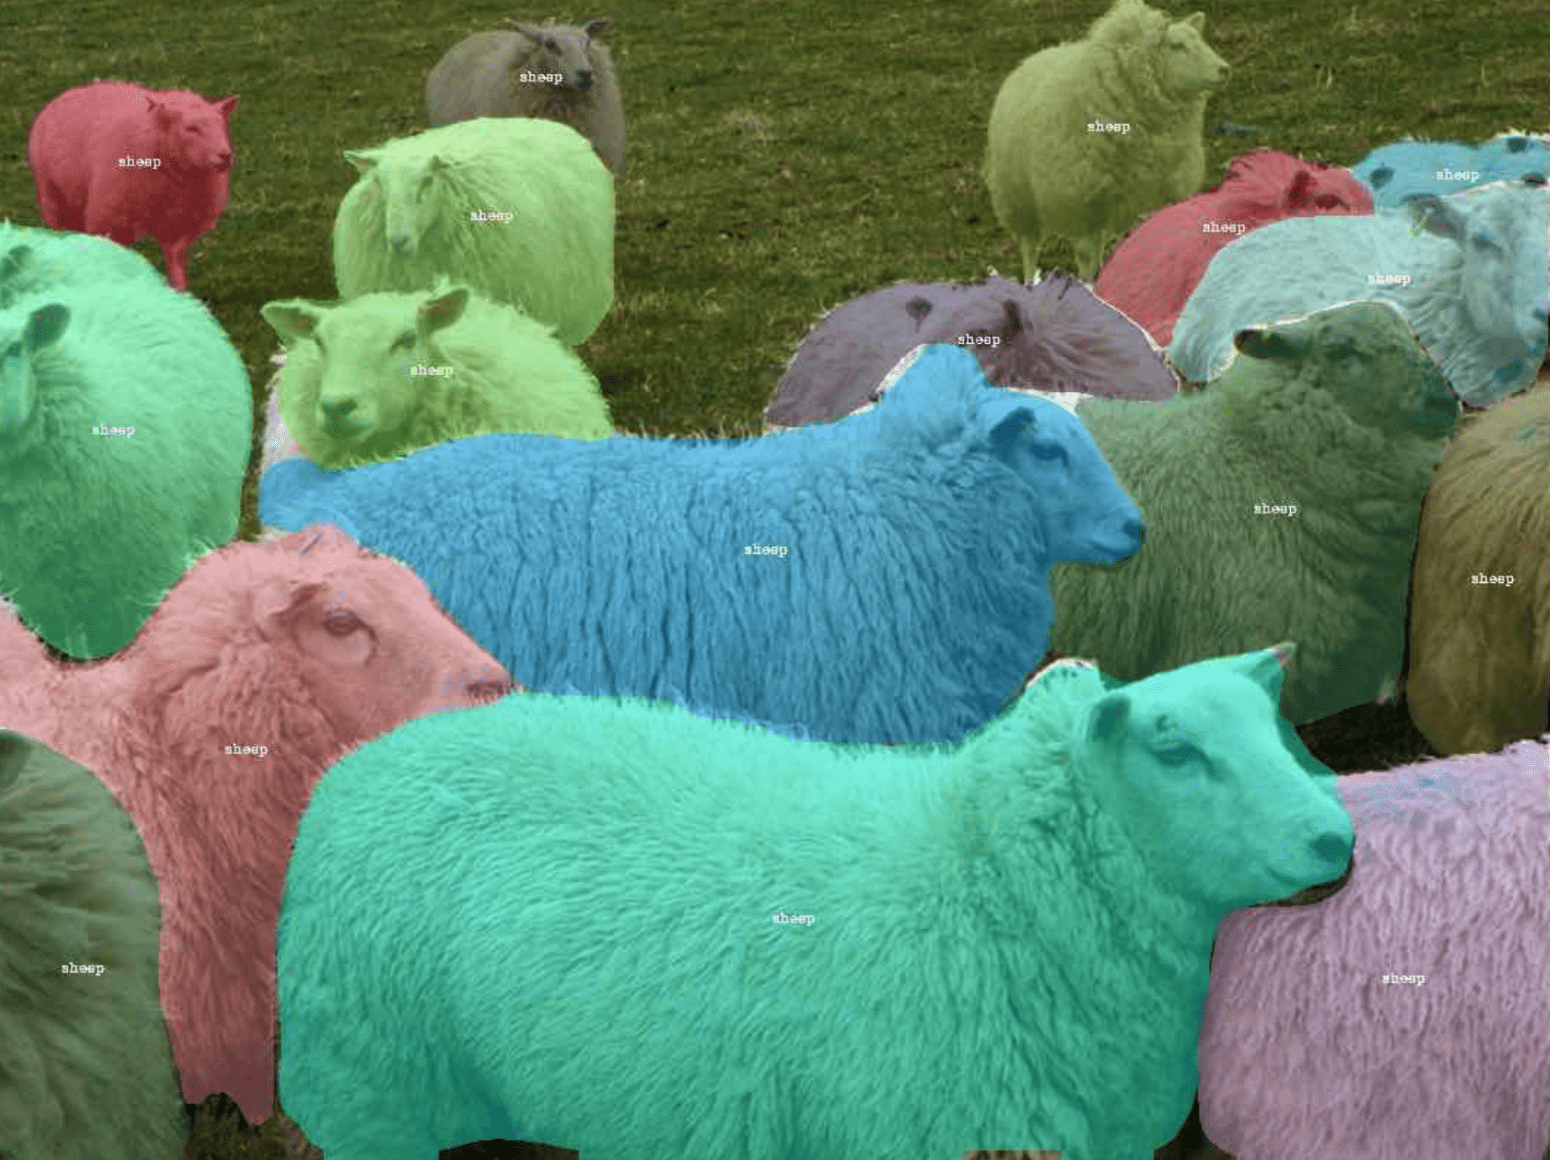 How to perform self-supervised learning on high-dimensional data - sheeps